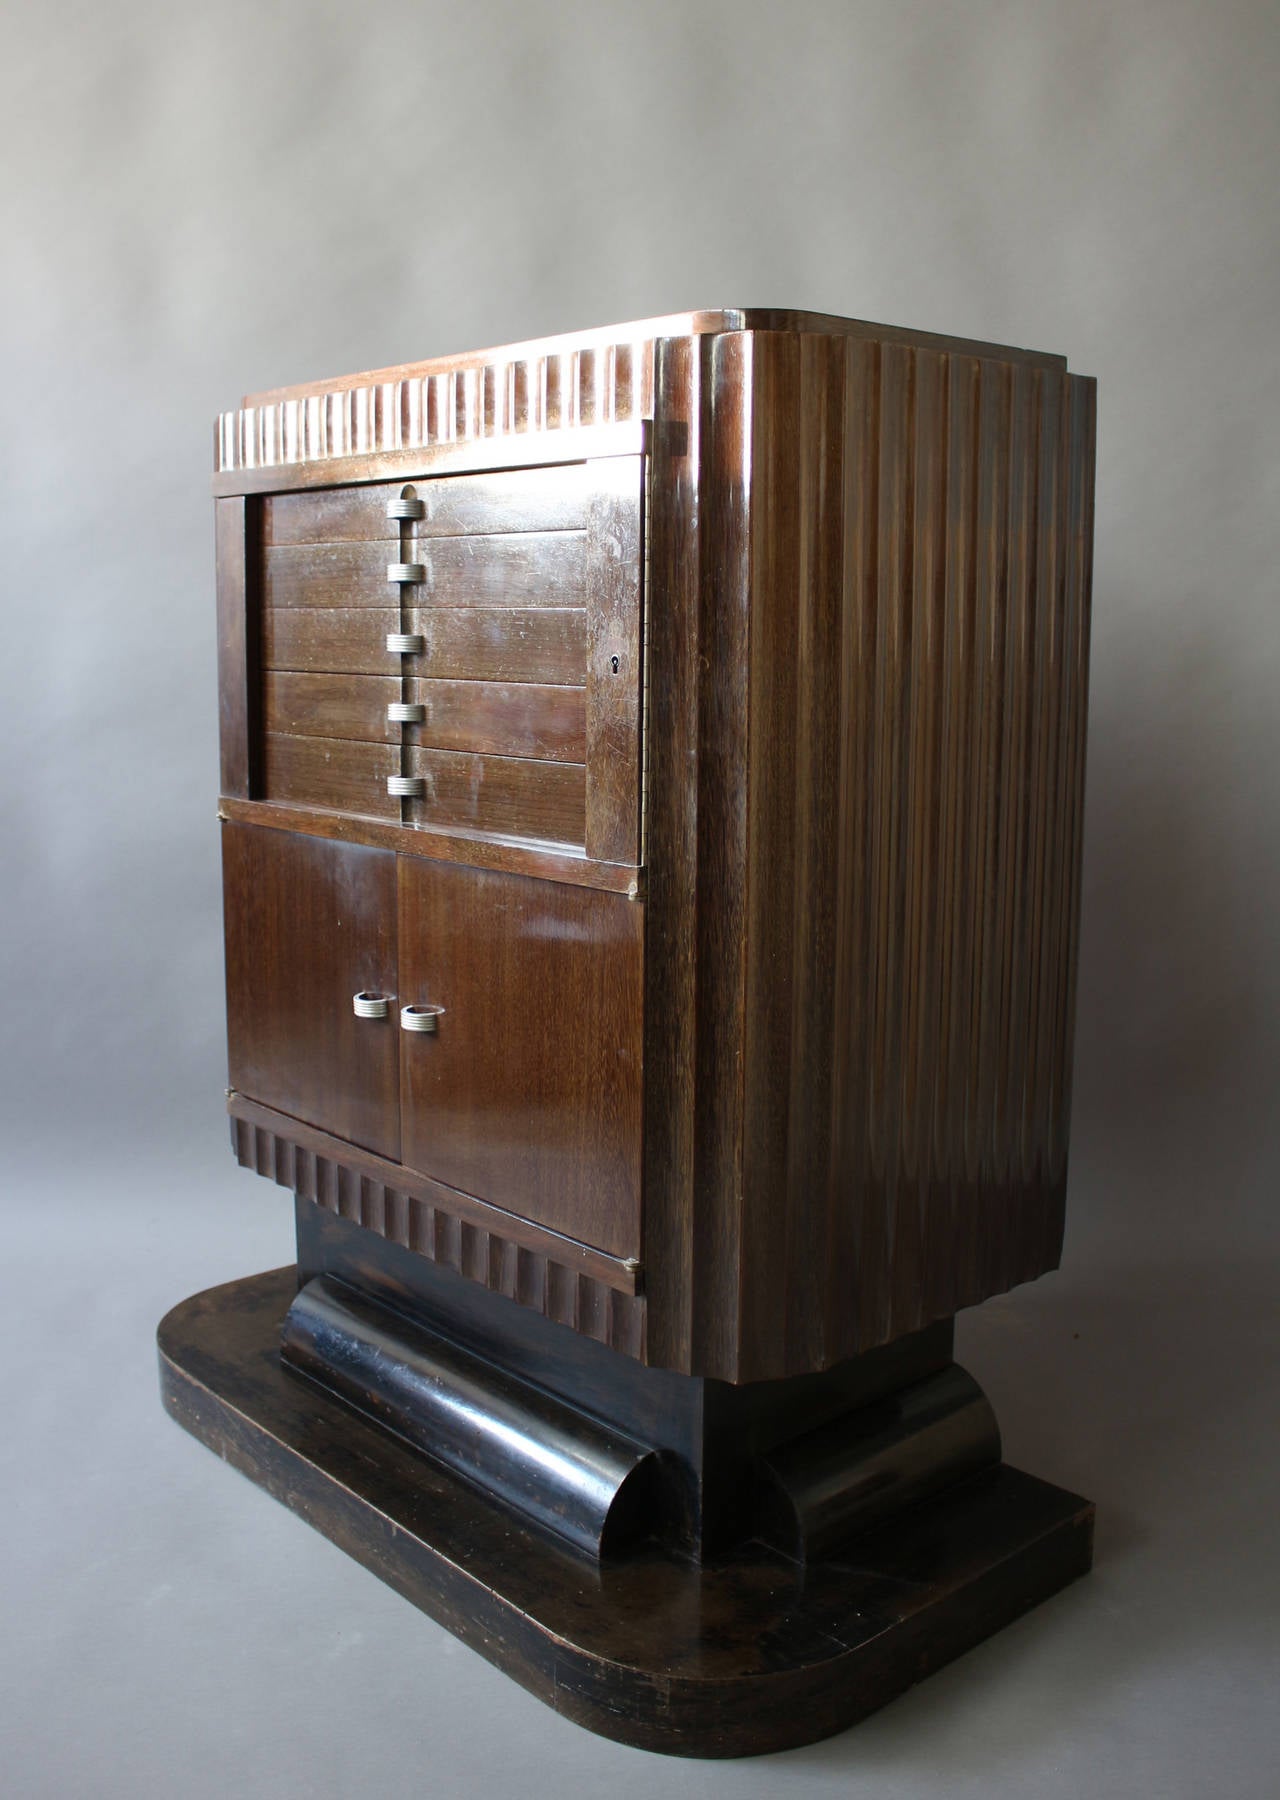 A Fine French 1930's amaranth silverware cabinet / buffet by Christian Krass with an insert marble top and chrome details. Base is blackened pear wood, back is solid oak.
